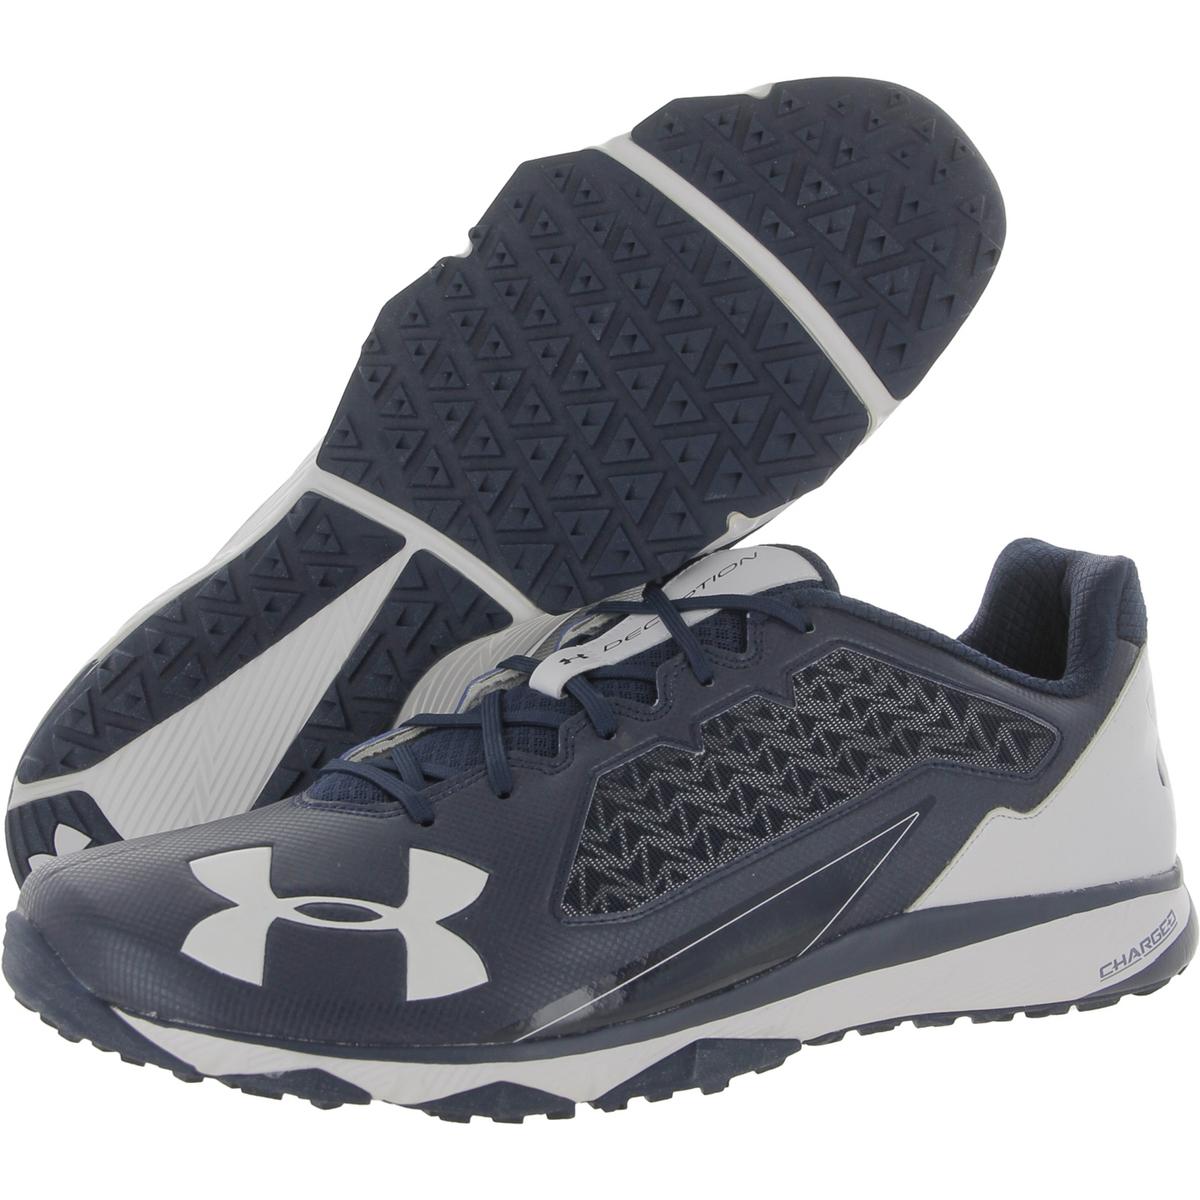 Under Armour Deception Trainer Mens Baseball Charged Trainers